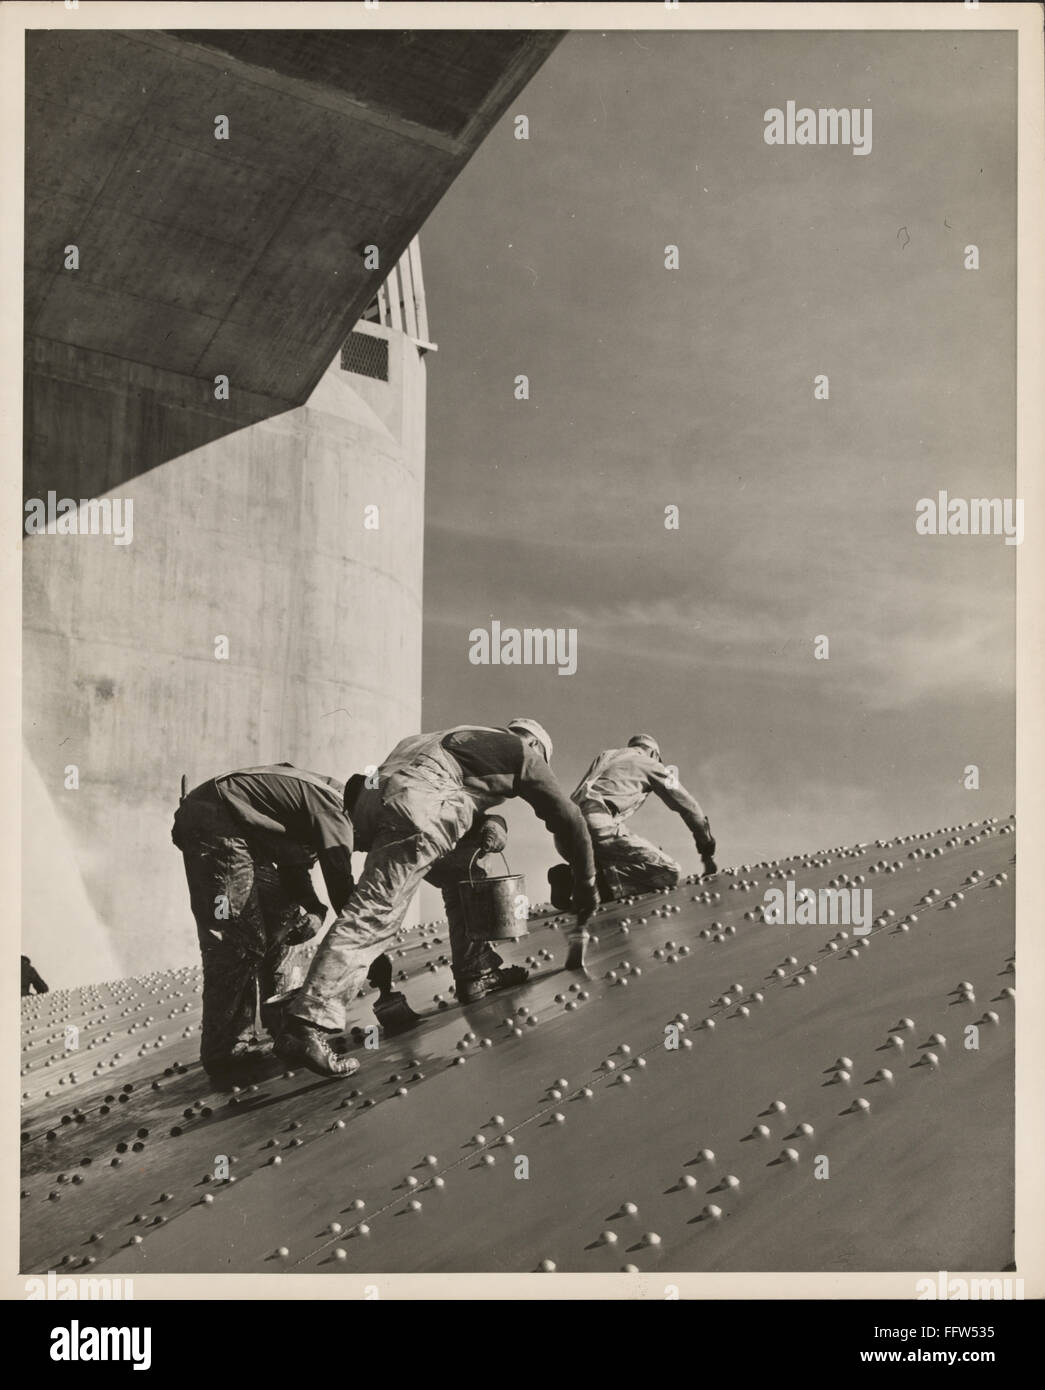 HOOVER DAM, c1940. /nThree construction workers applying a coat of paint on a riveted steel wall on the Hoover Dam spillway, c1940. Stock Photo